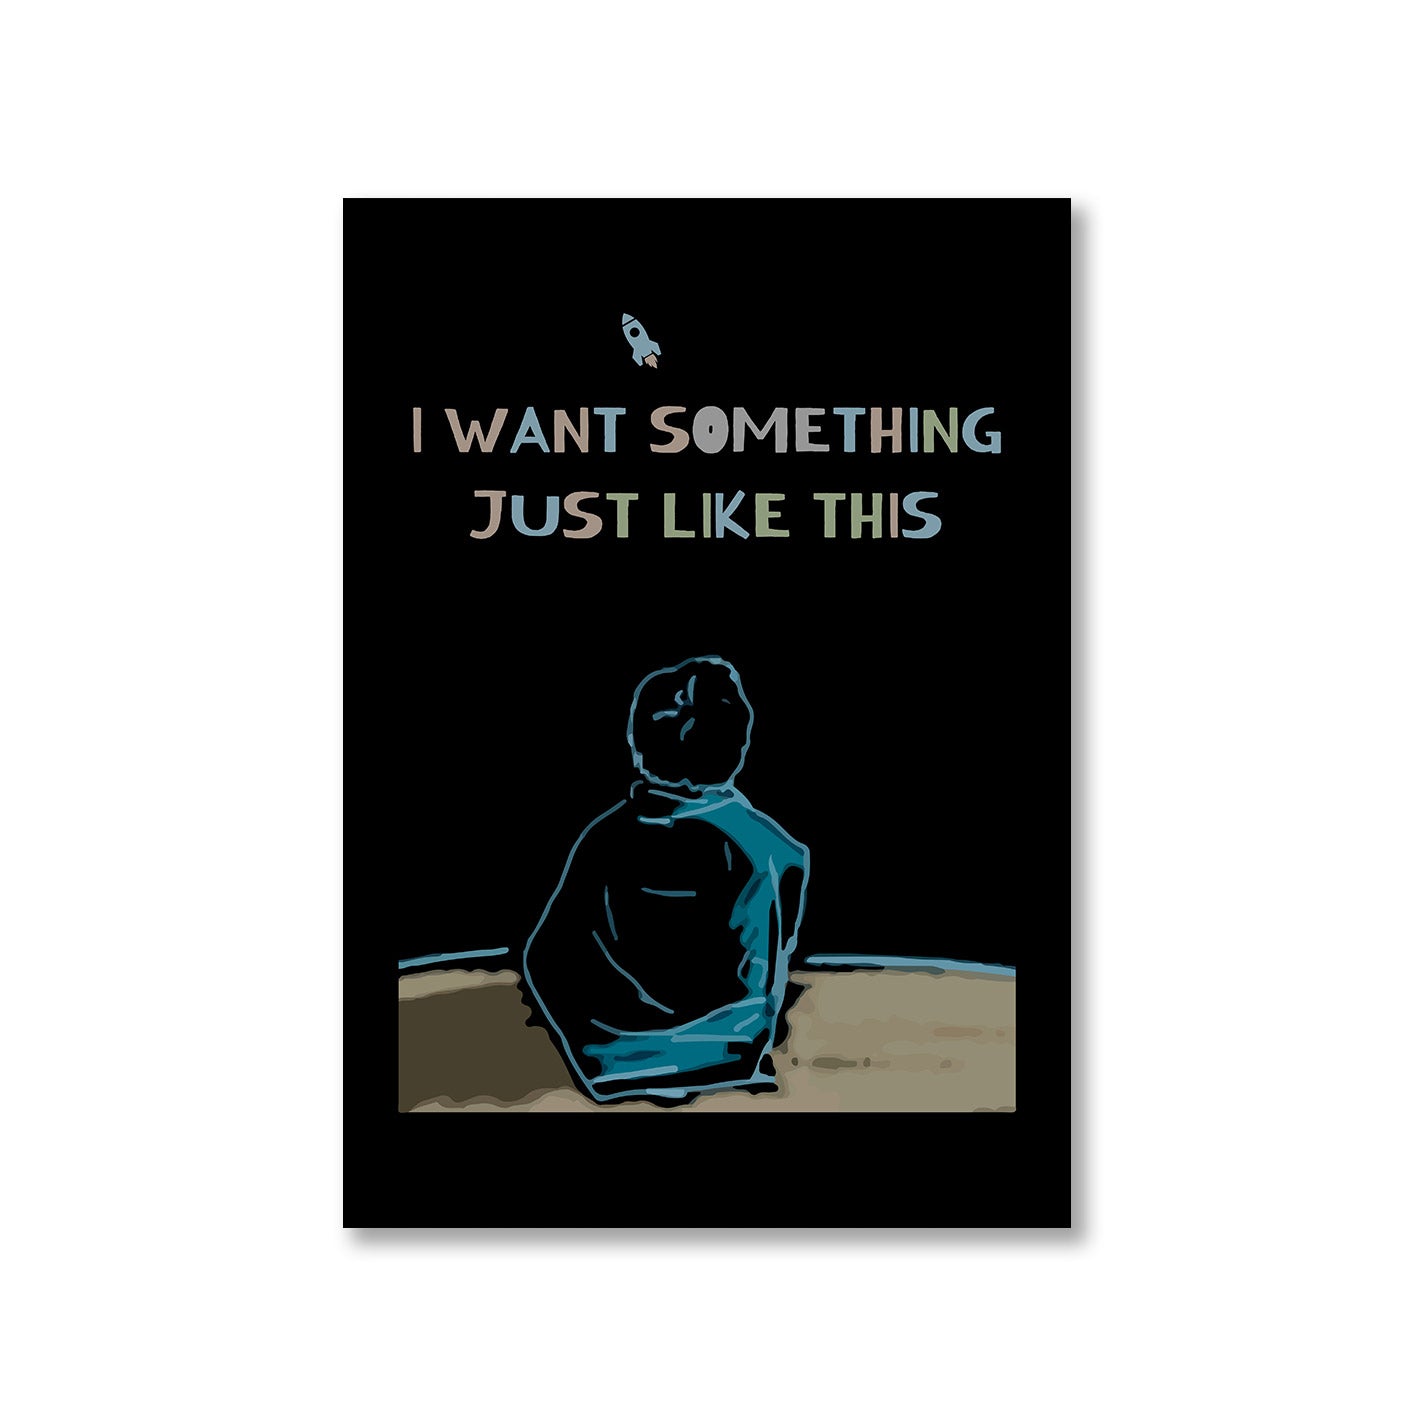 coldplay i want something just like this poster wall art buy online india the banyan tee tbt a4